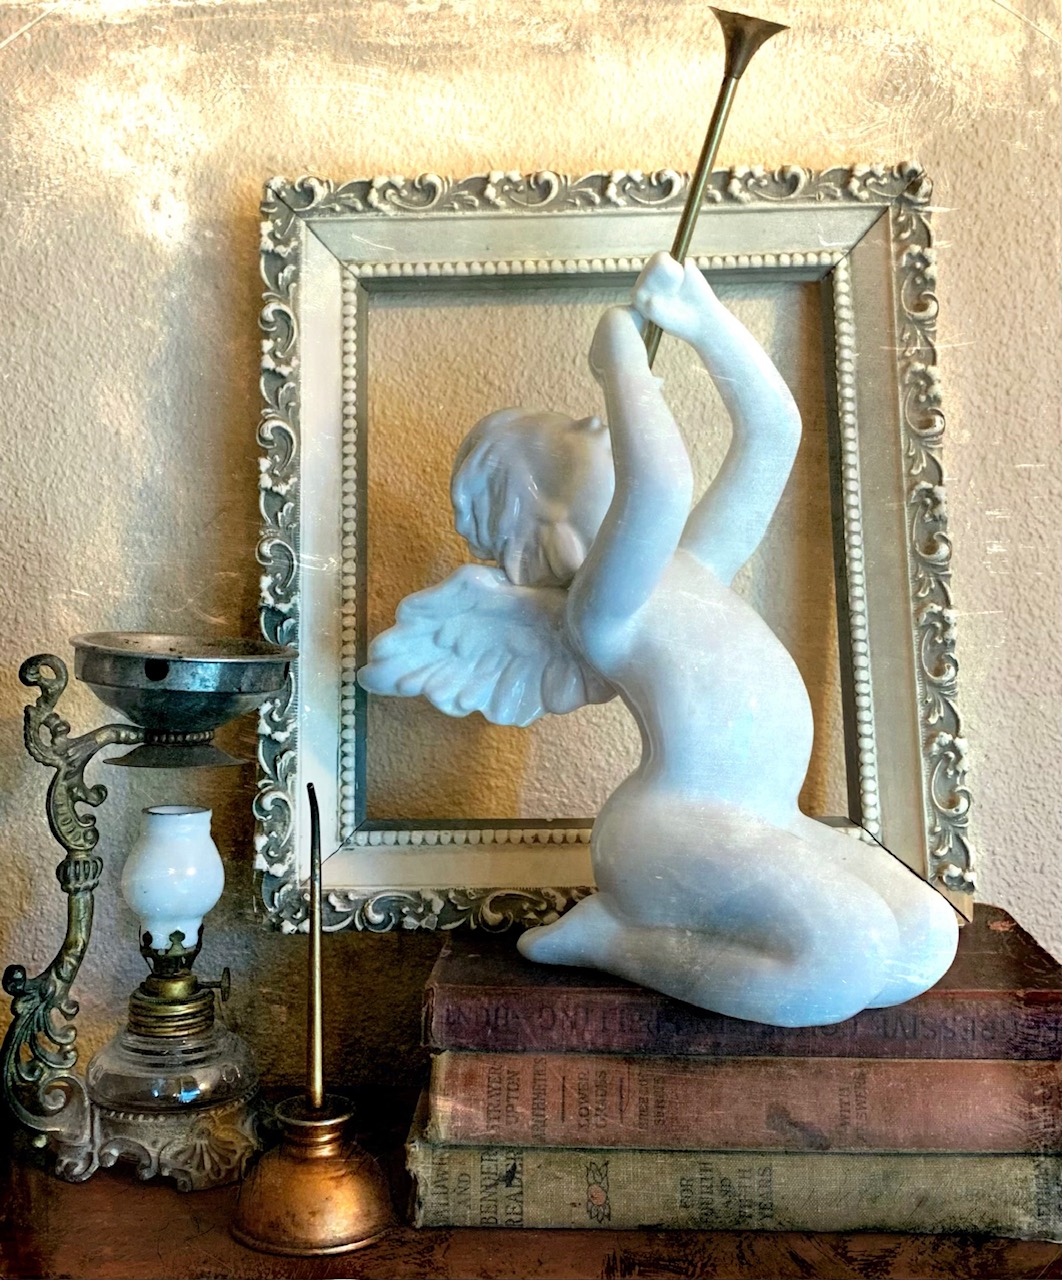 Vintage sculpture of a figure with a trumpet, antique books, and ornate frame, evoking classic artistic decor.